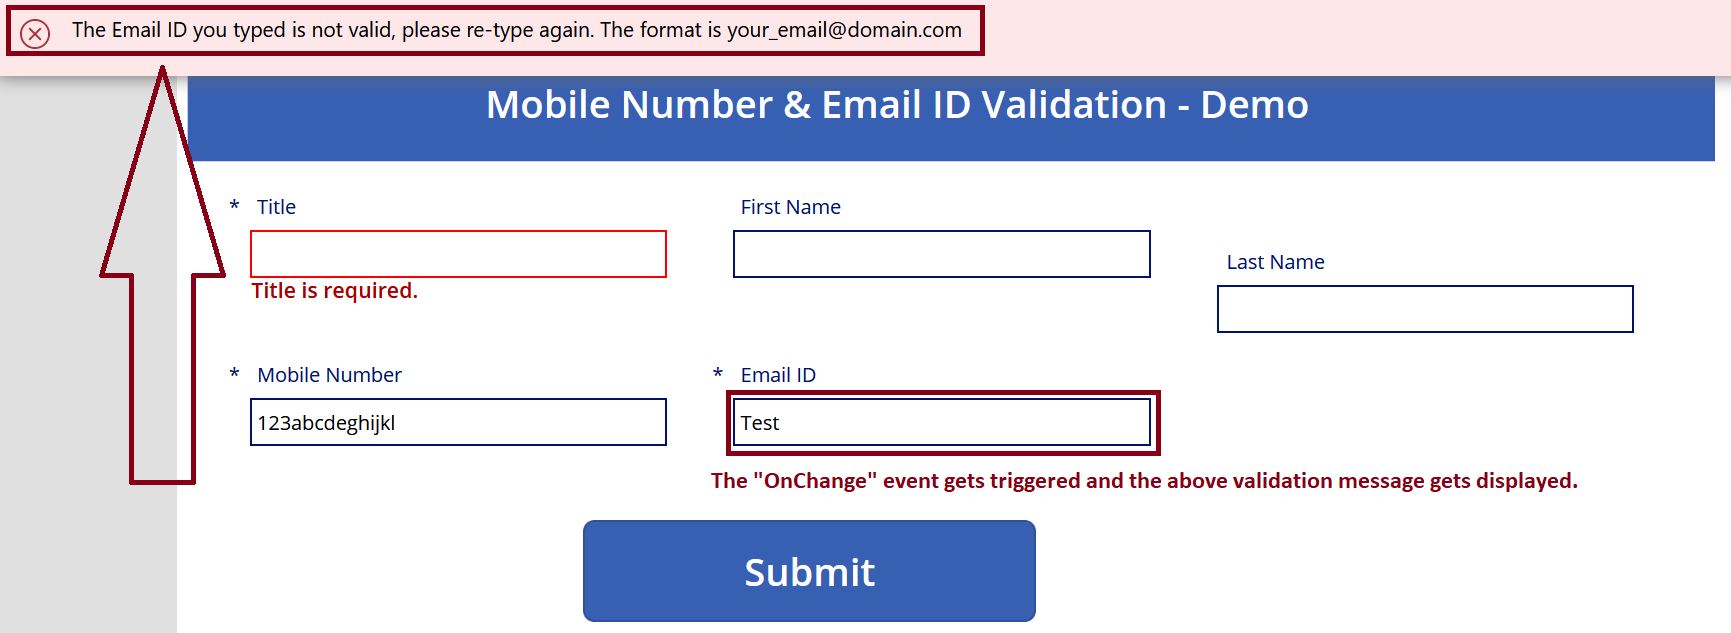 Email ID validation demo in PowerApps